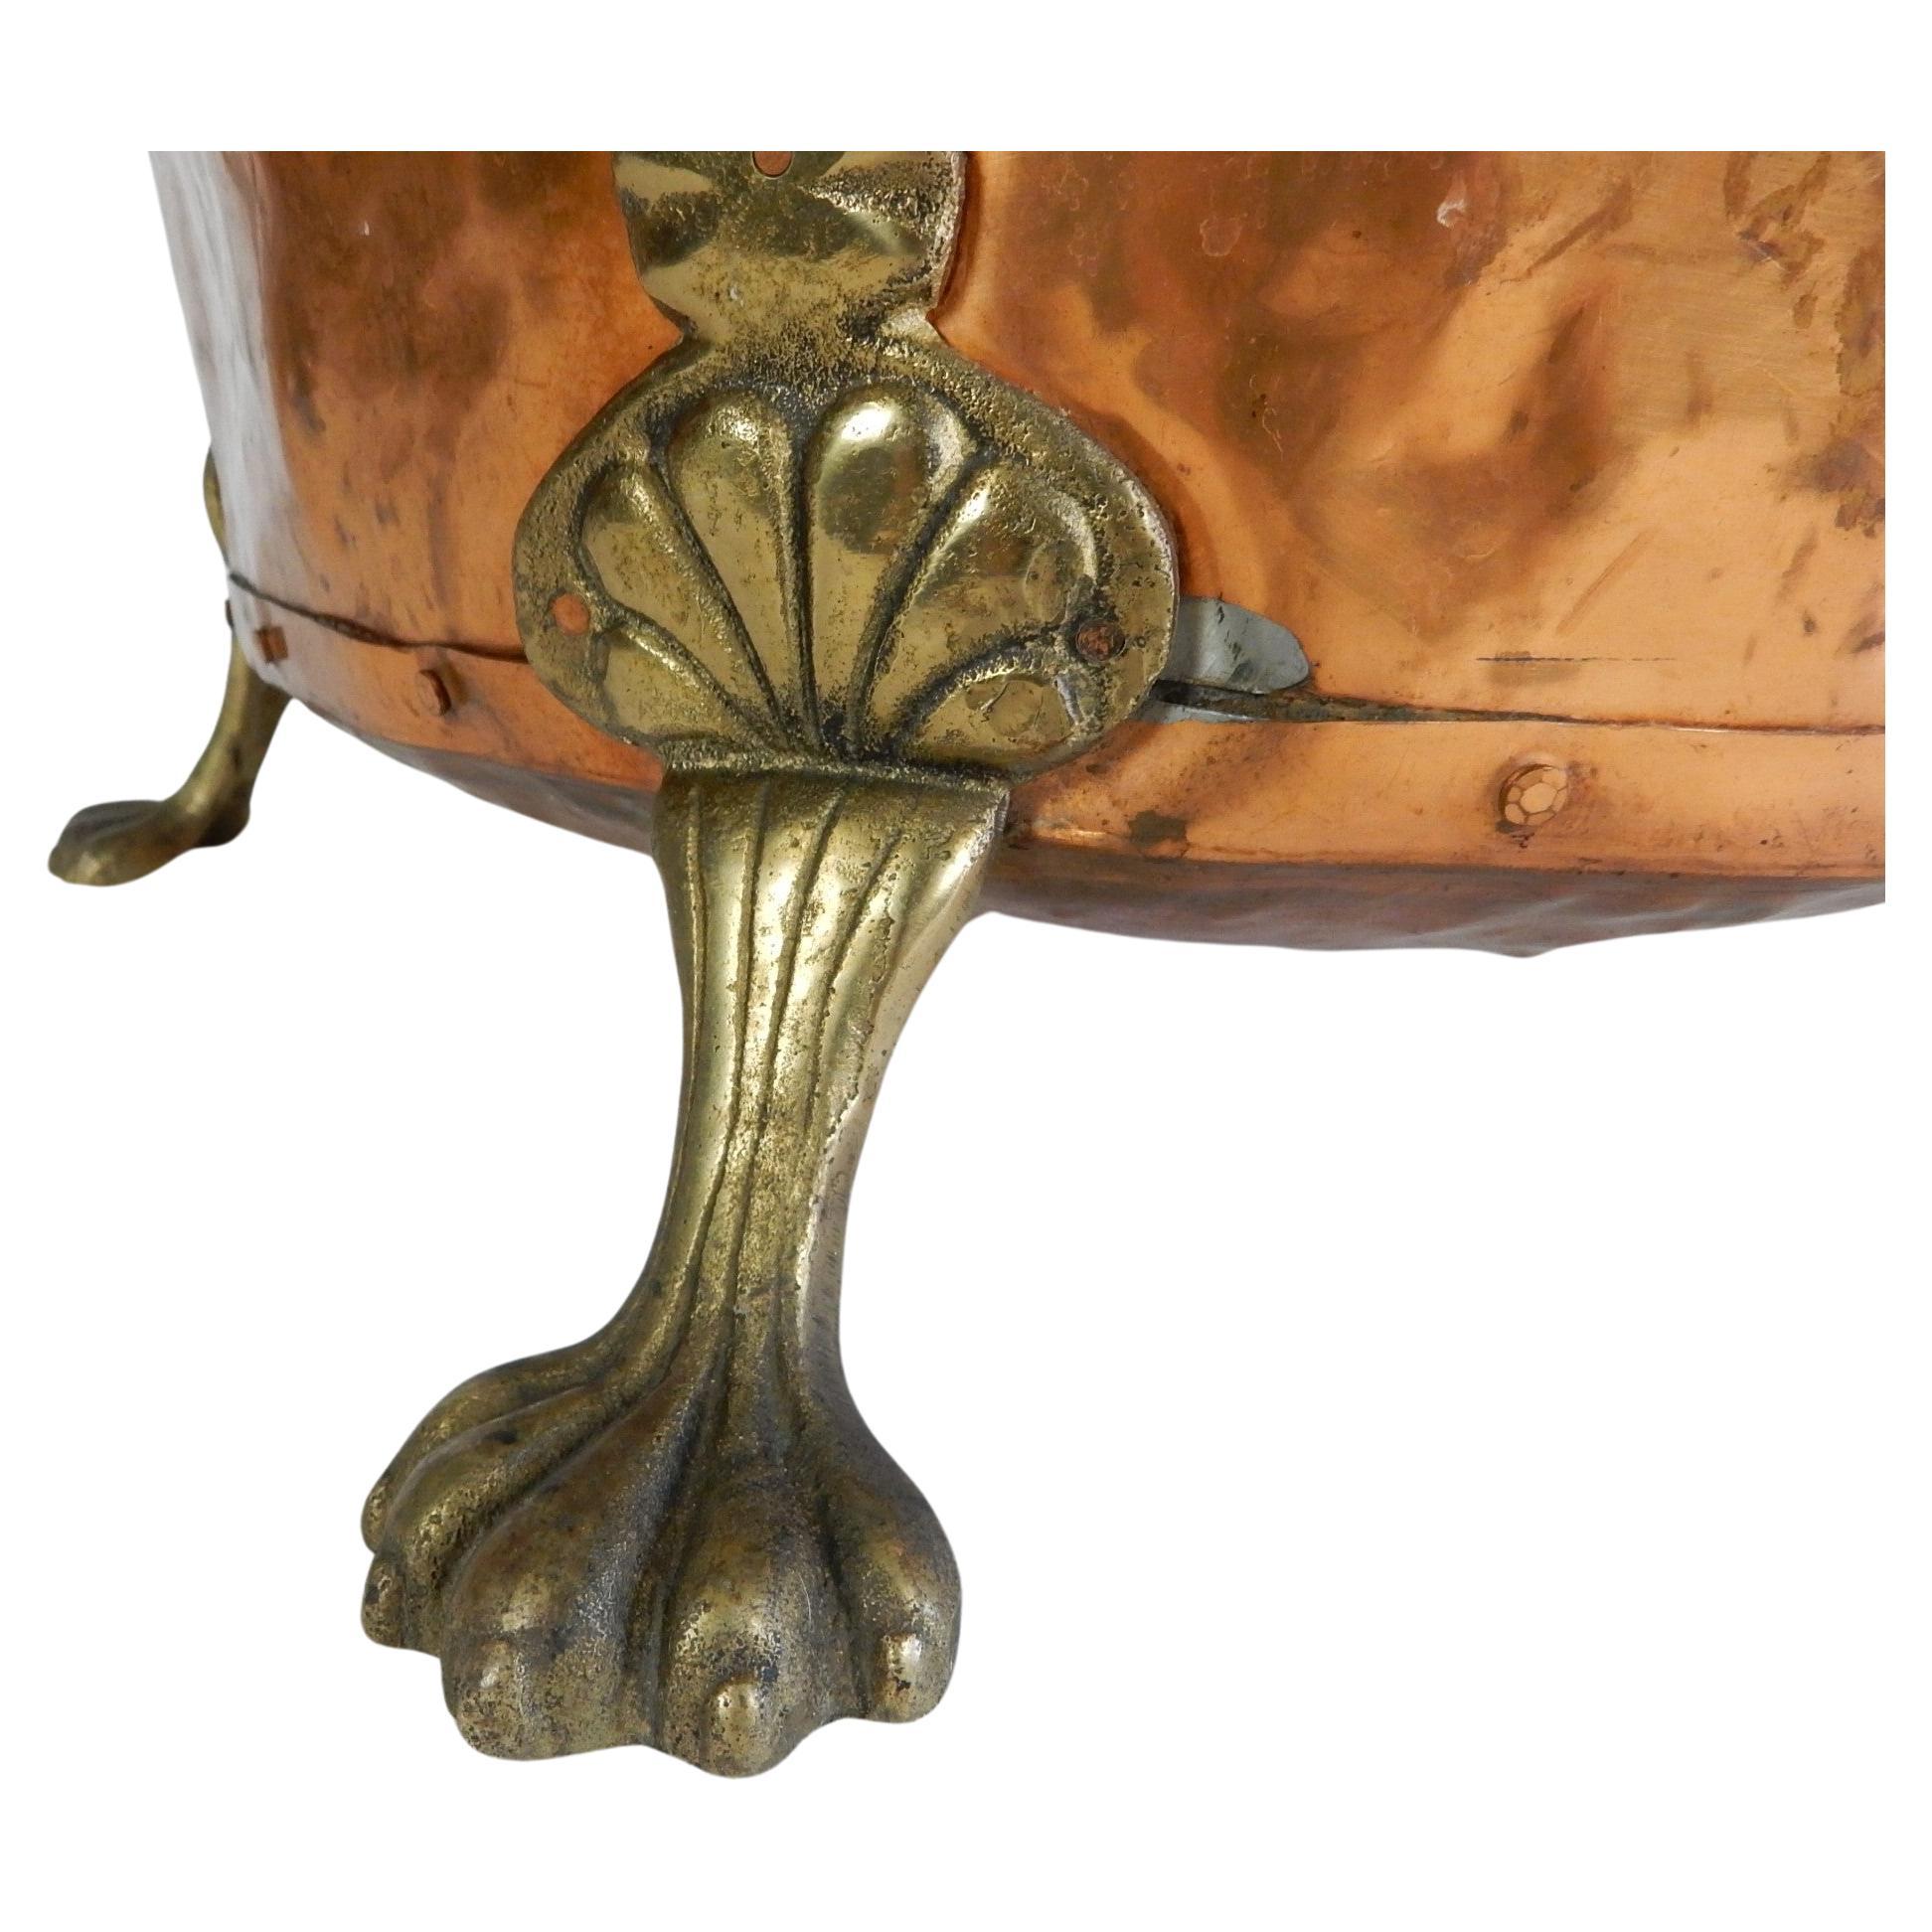 Classic Baroque Revival hammered copper log bin, planter or wine cooler with large claw feet and lion medallion handles.
Well used but still retains all parts and a lovely aged patina.
Large piece measuring 15